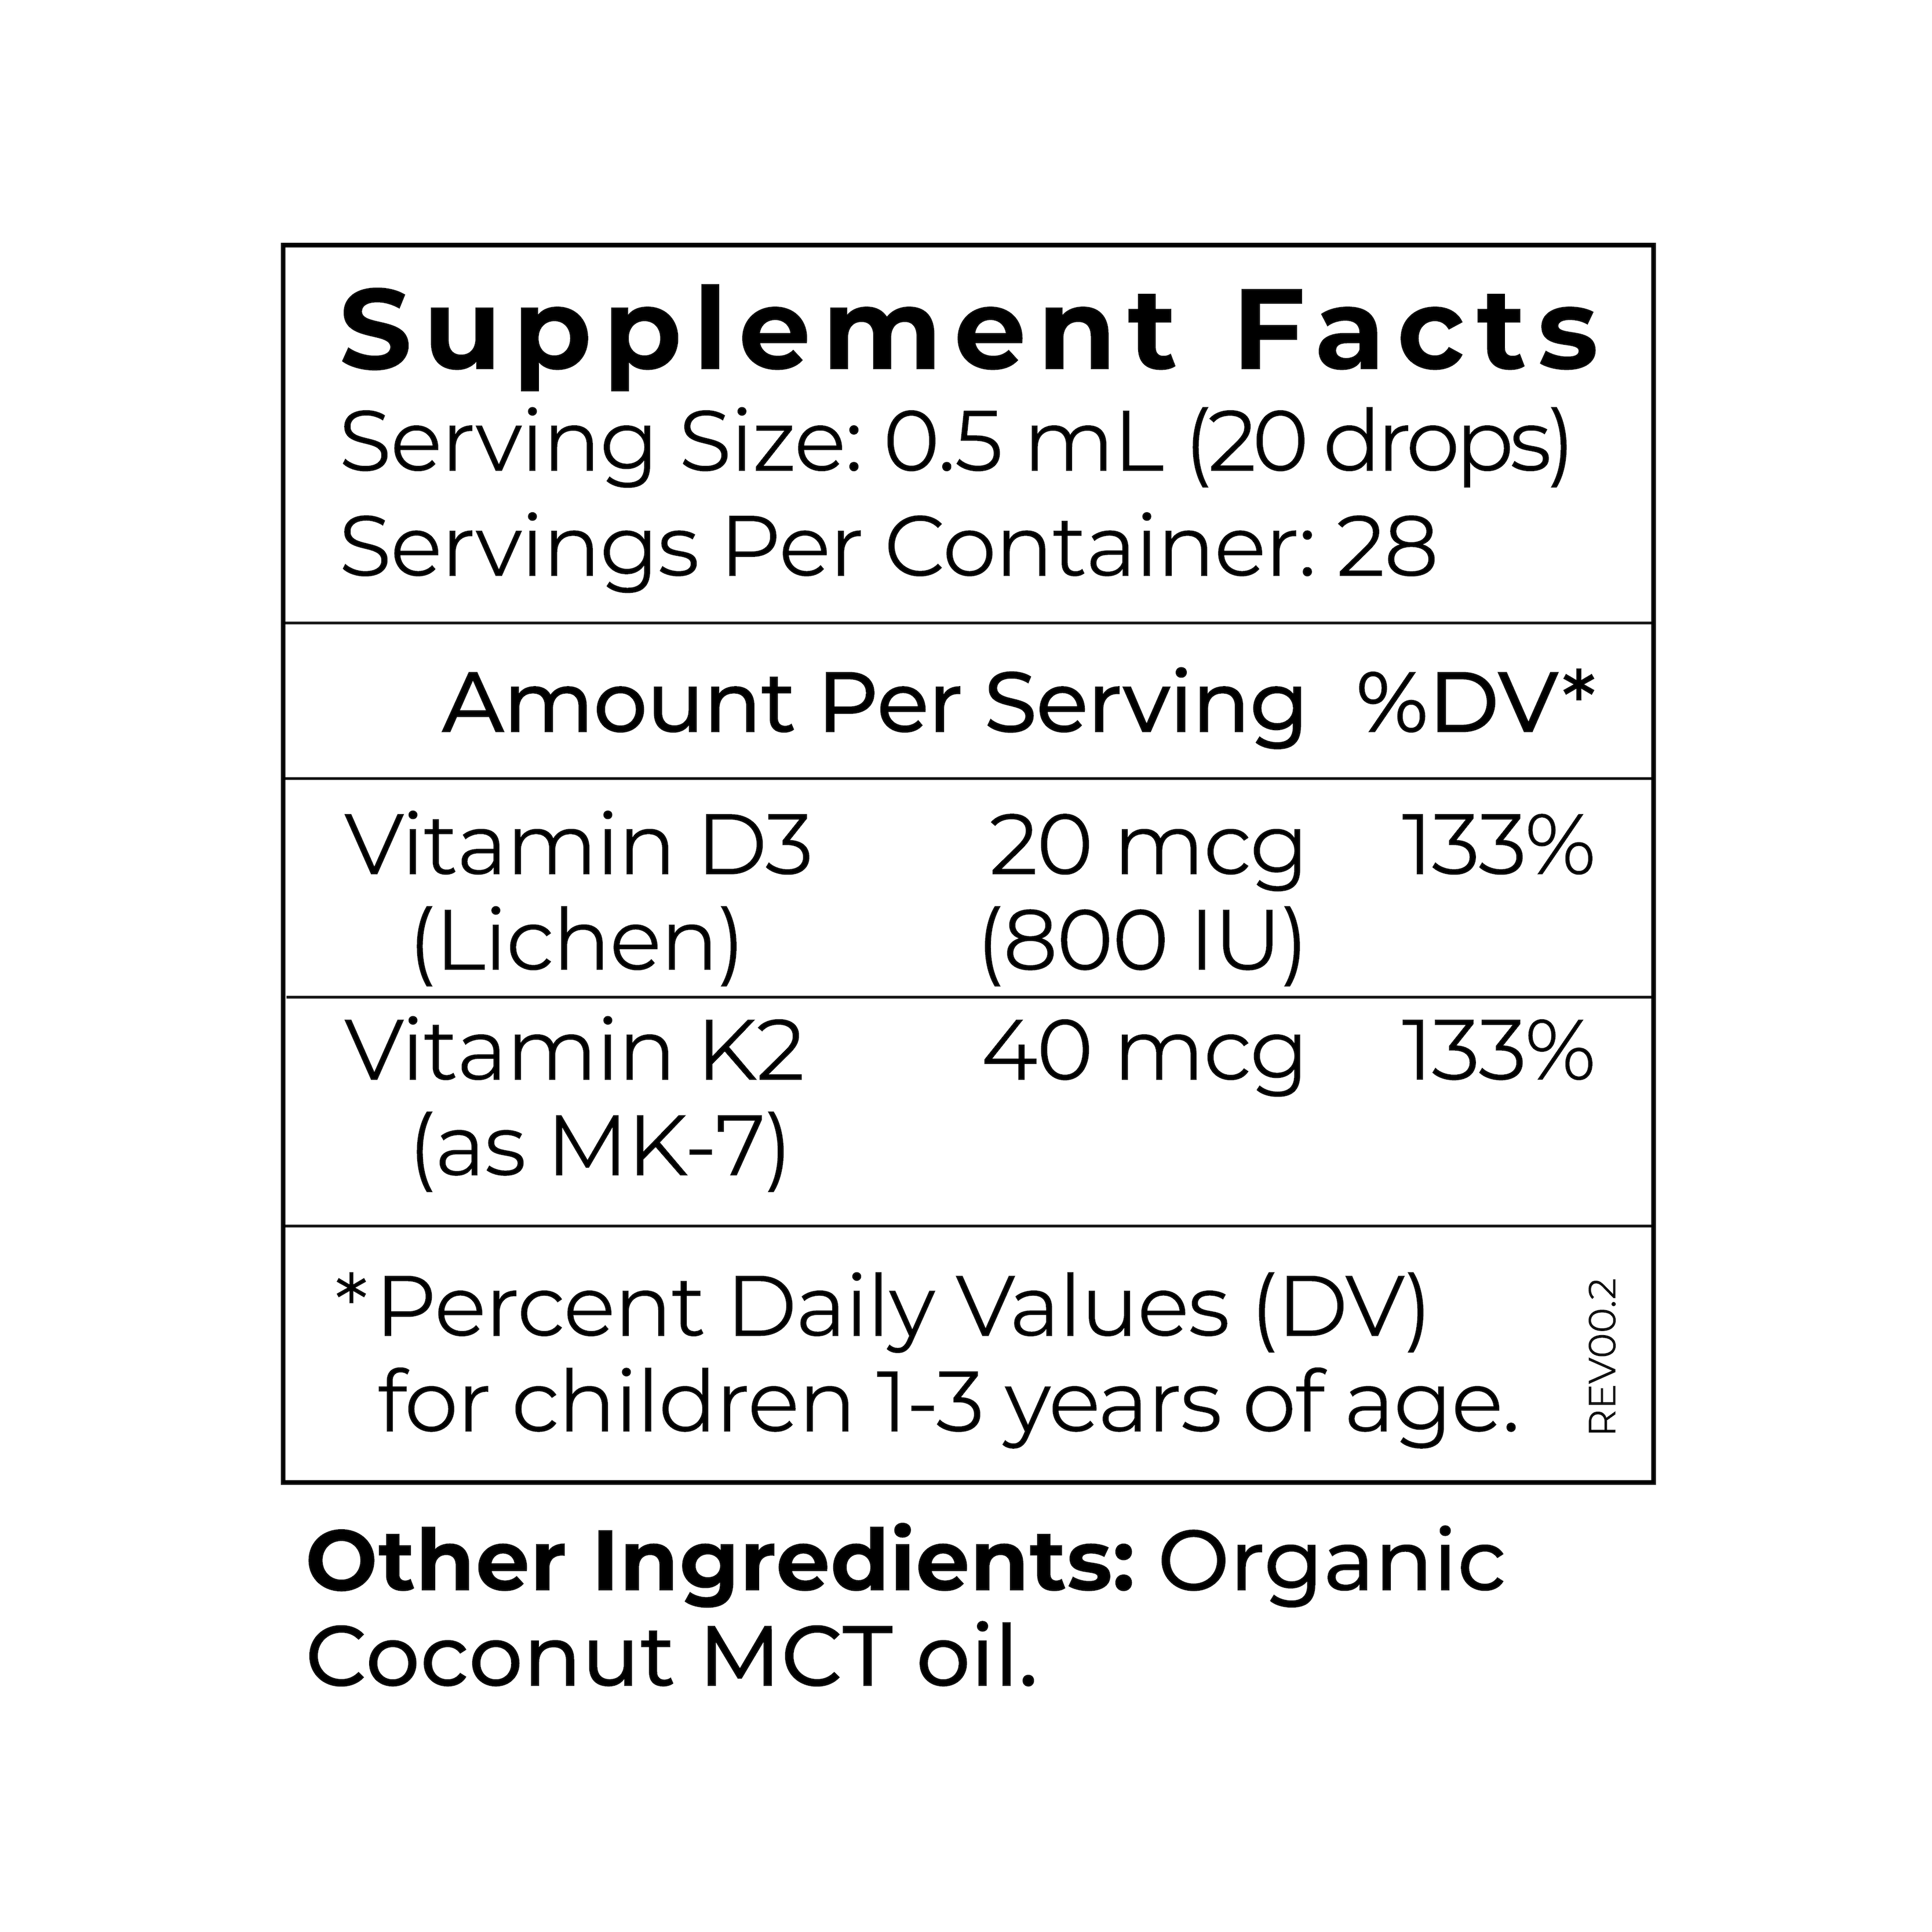 Cymbiotika® Kids Toddler D3+K2 Bottle and Box Supplement Facts Panel